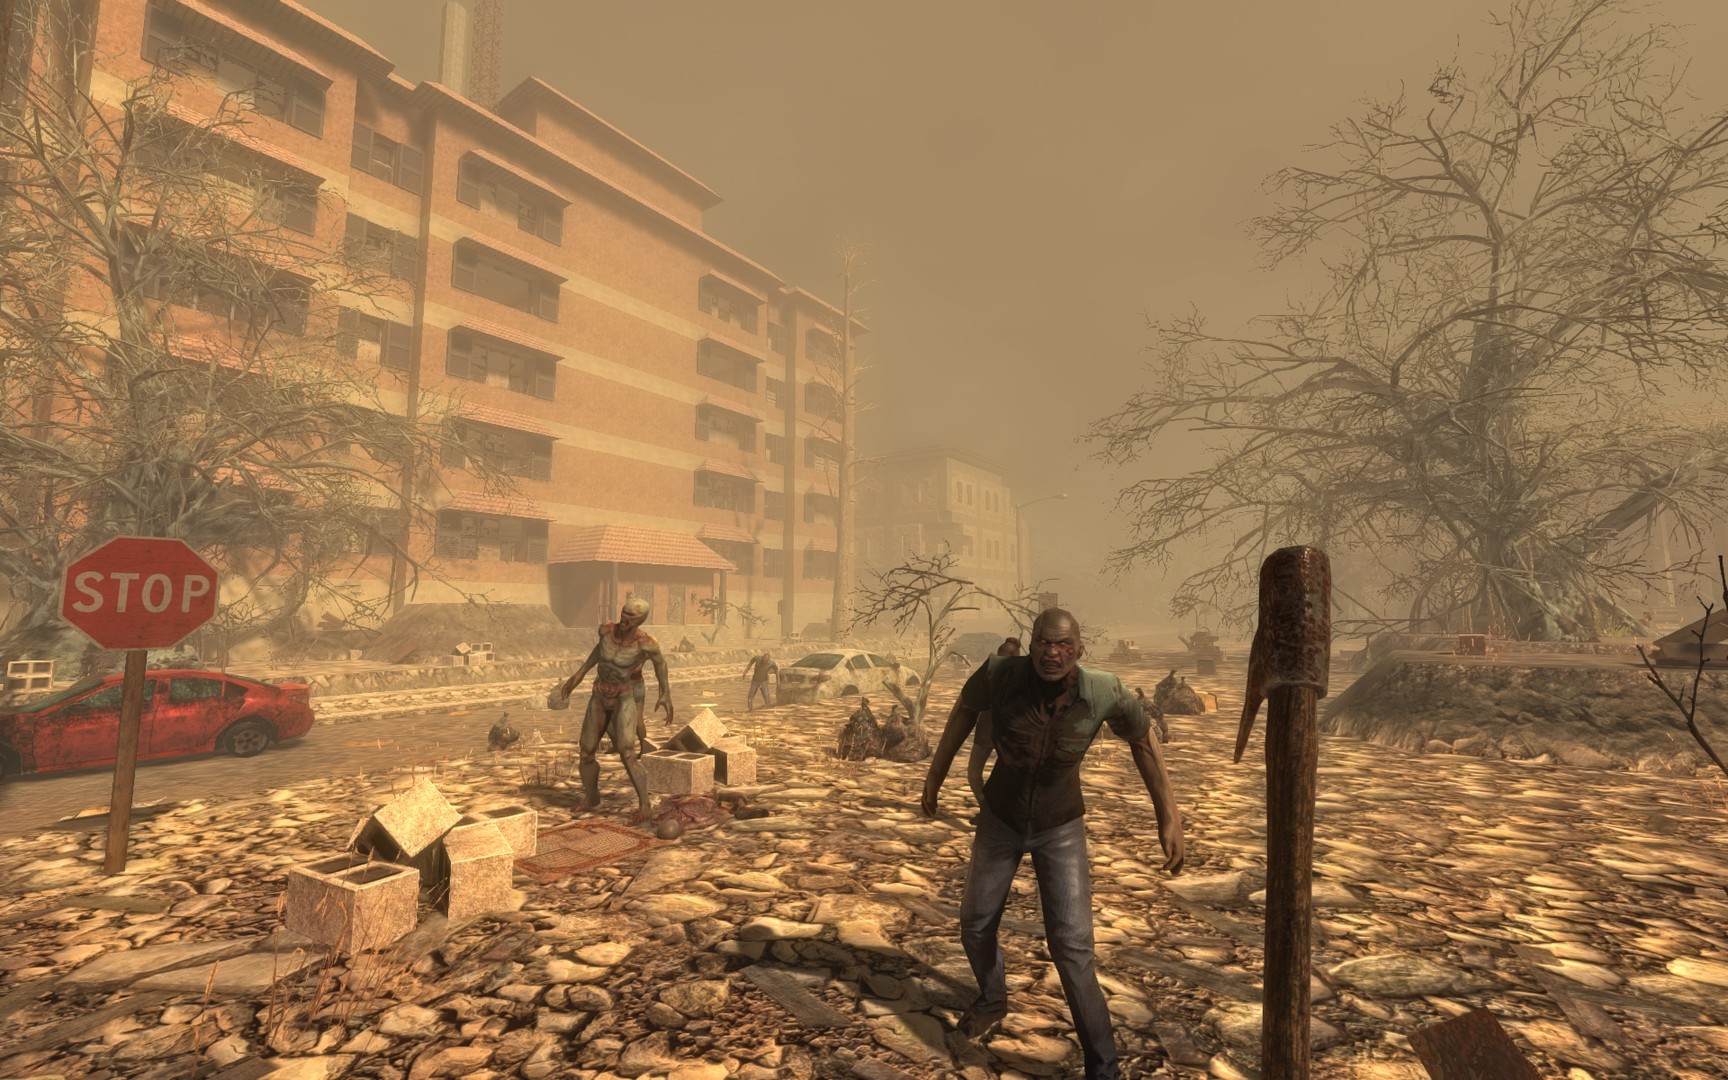 7 days to die wallpaper,action adventure game,pc game,adventure game,event,strategy video game